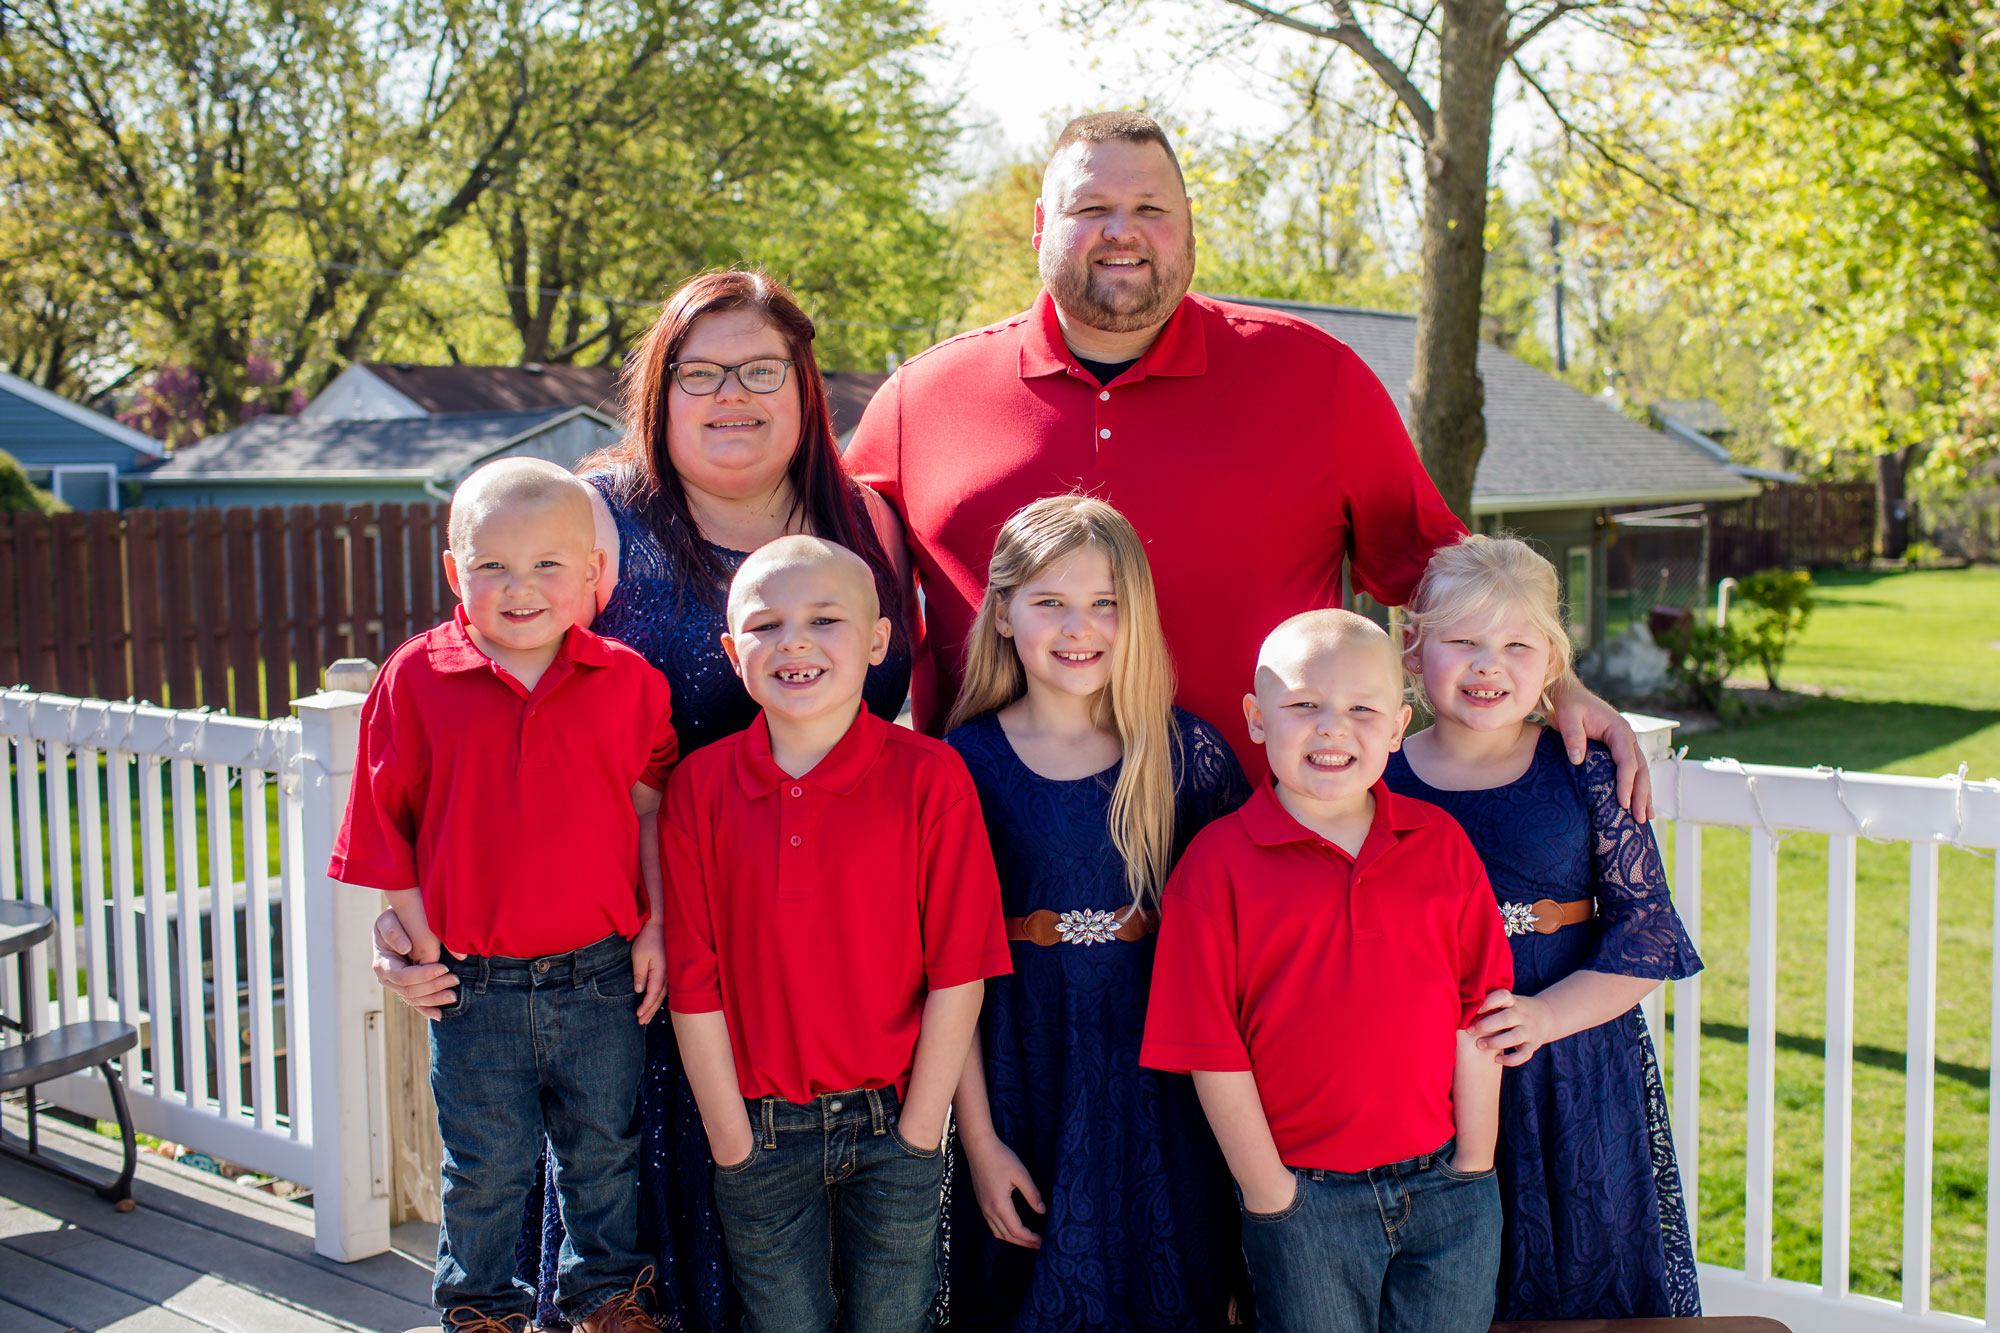 A photo of the whole Vanderberg family: Josh, Becca, and the 5 kids.